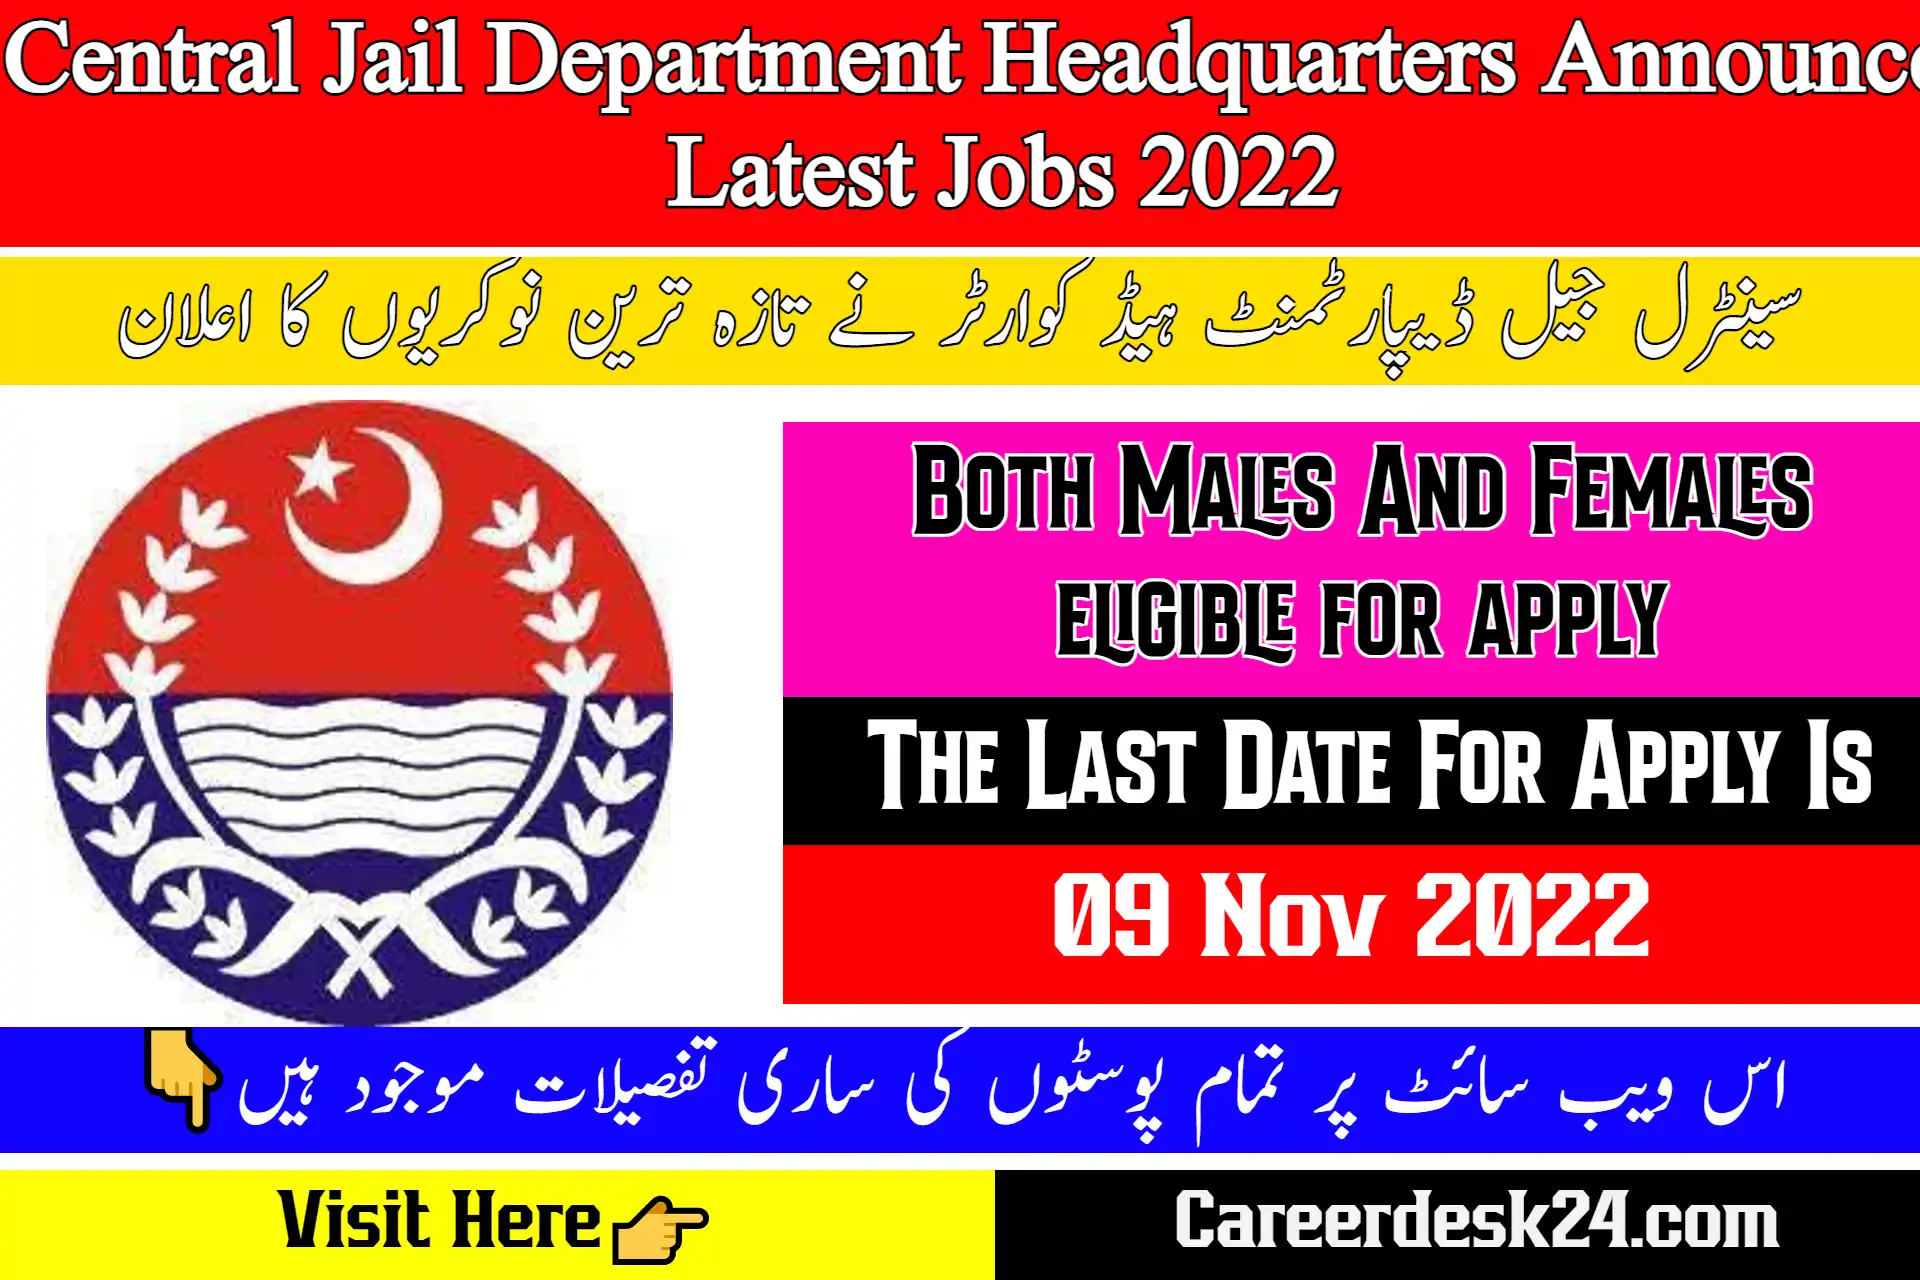 Central Jail Department Headquarters Announced Latest Jobs 2022